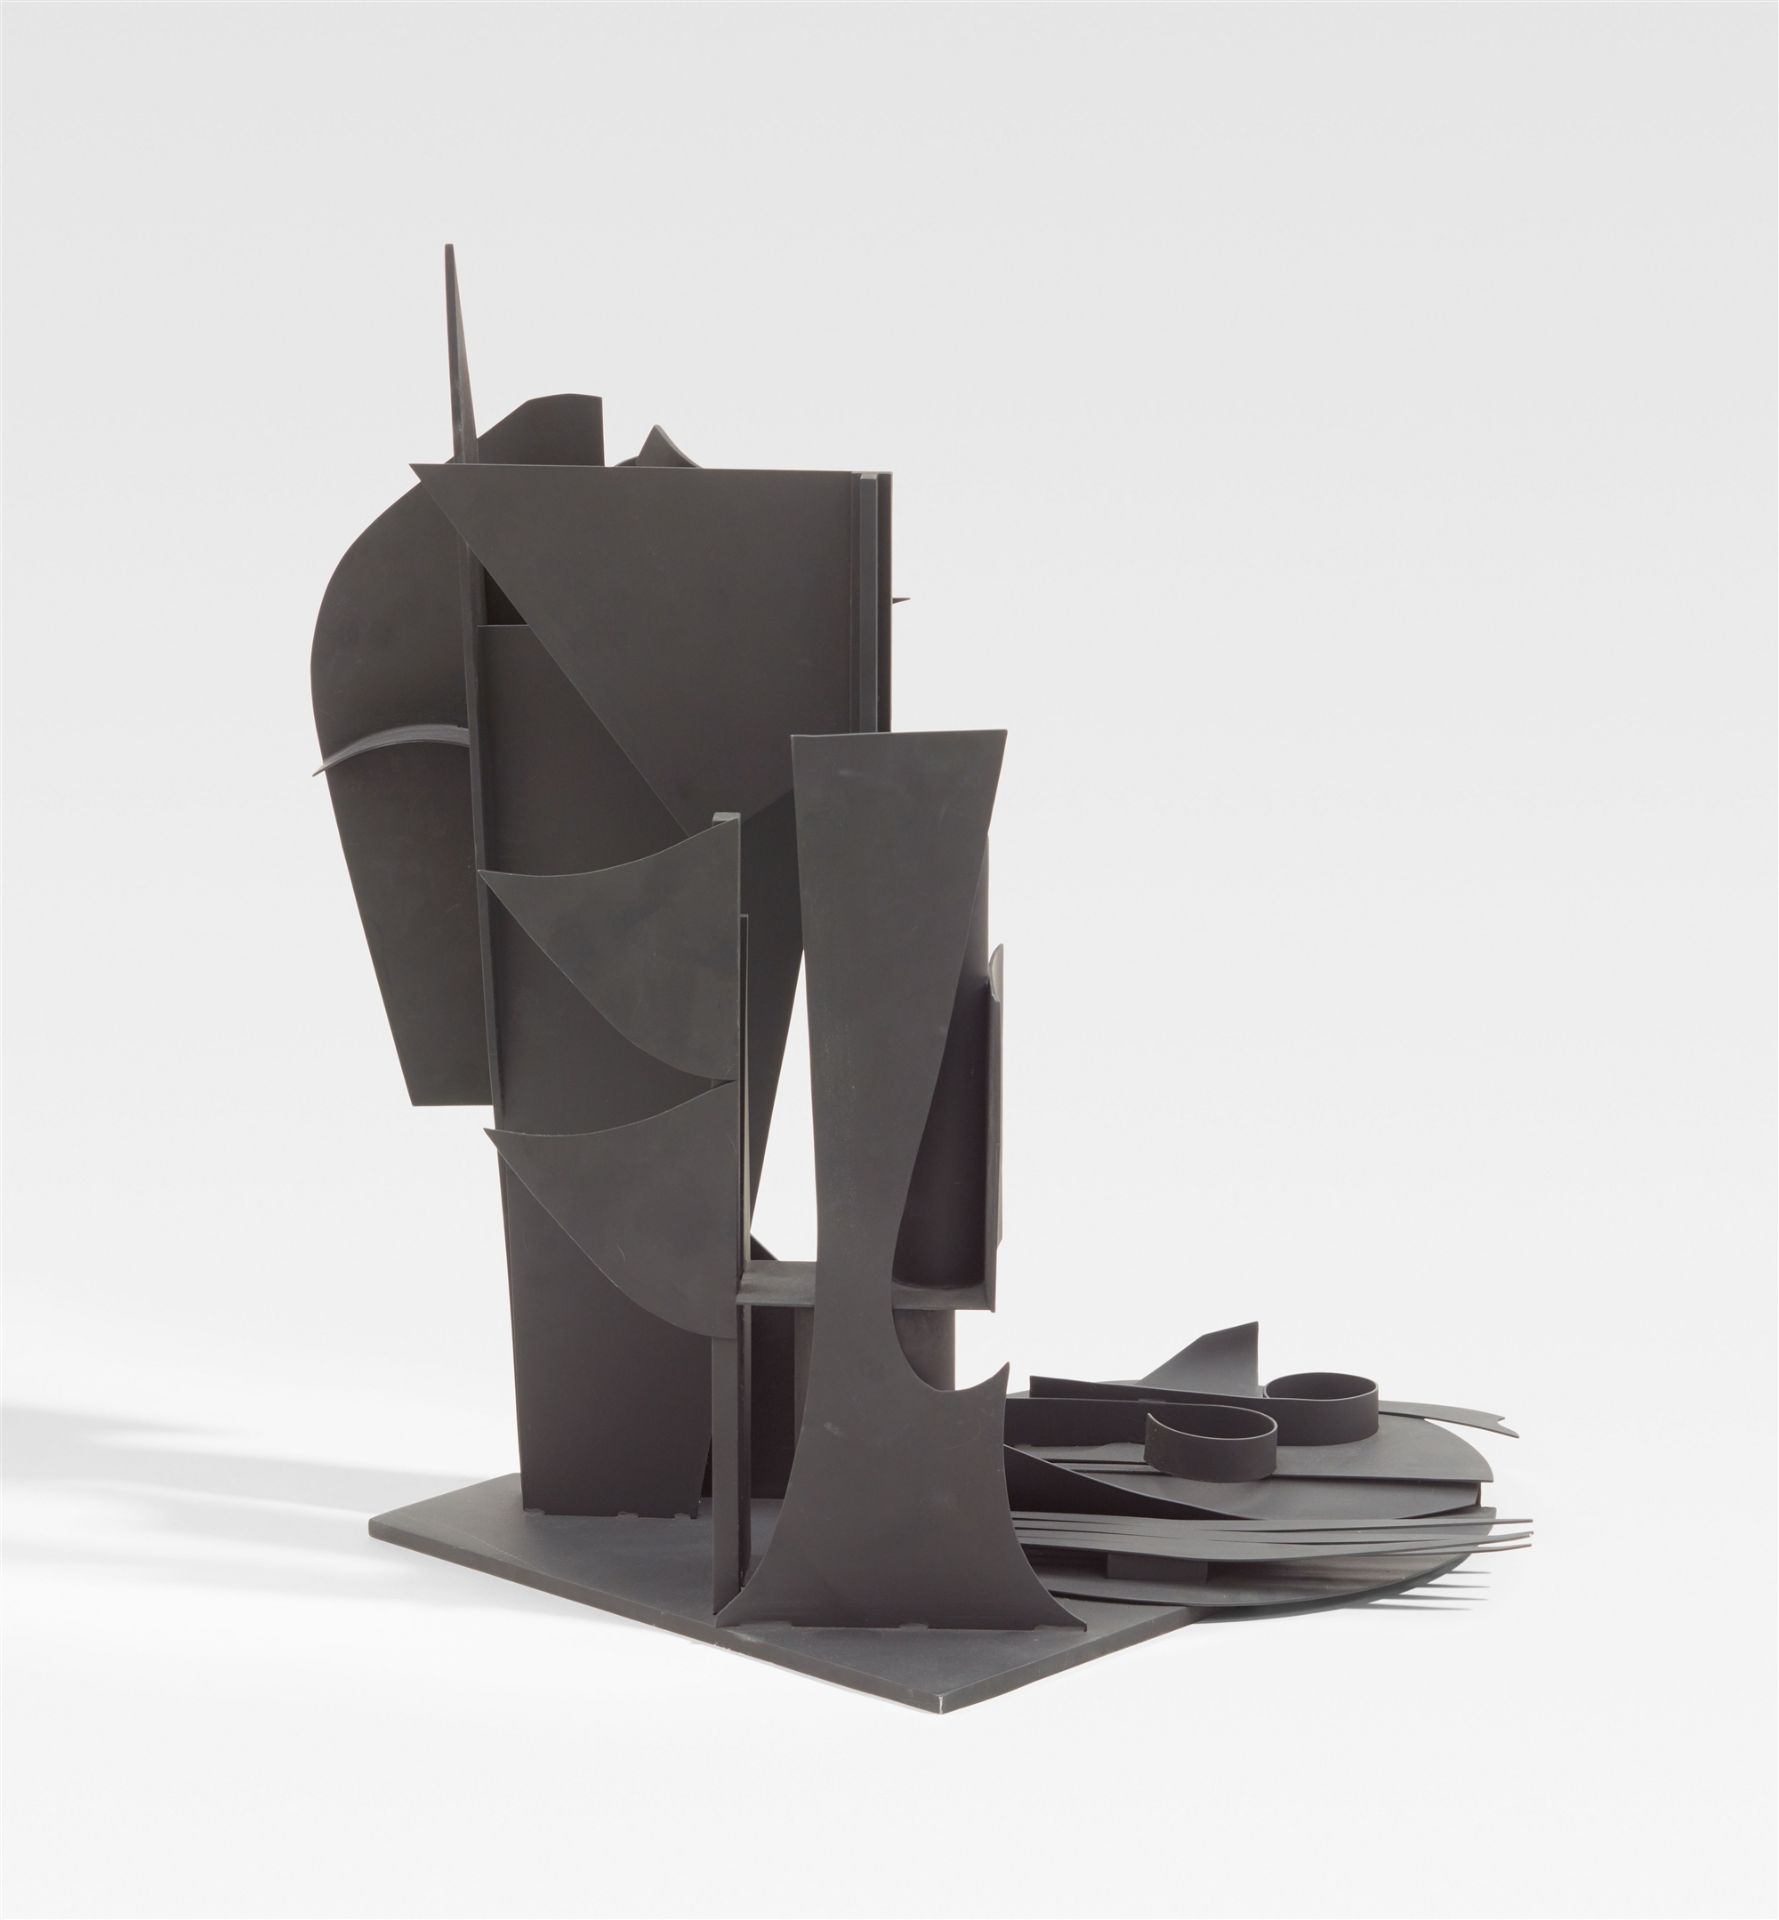 Louise Nevelson, Maquette for Sun Disc/Moon Shadow V - Image 2 of 2